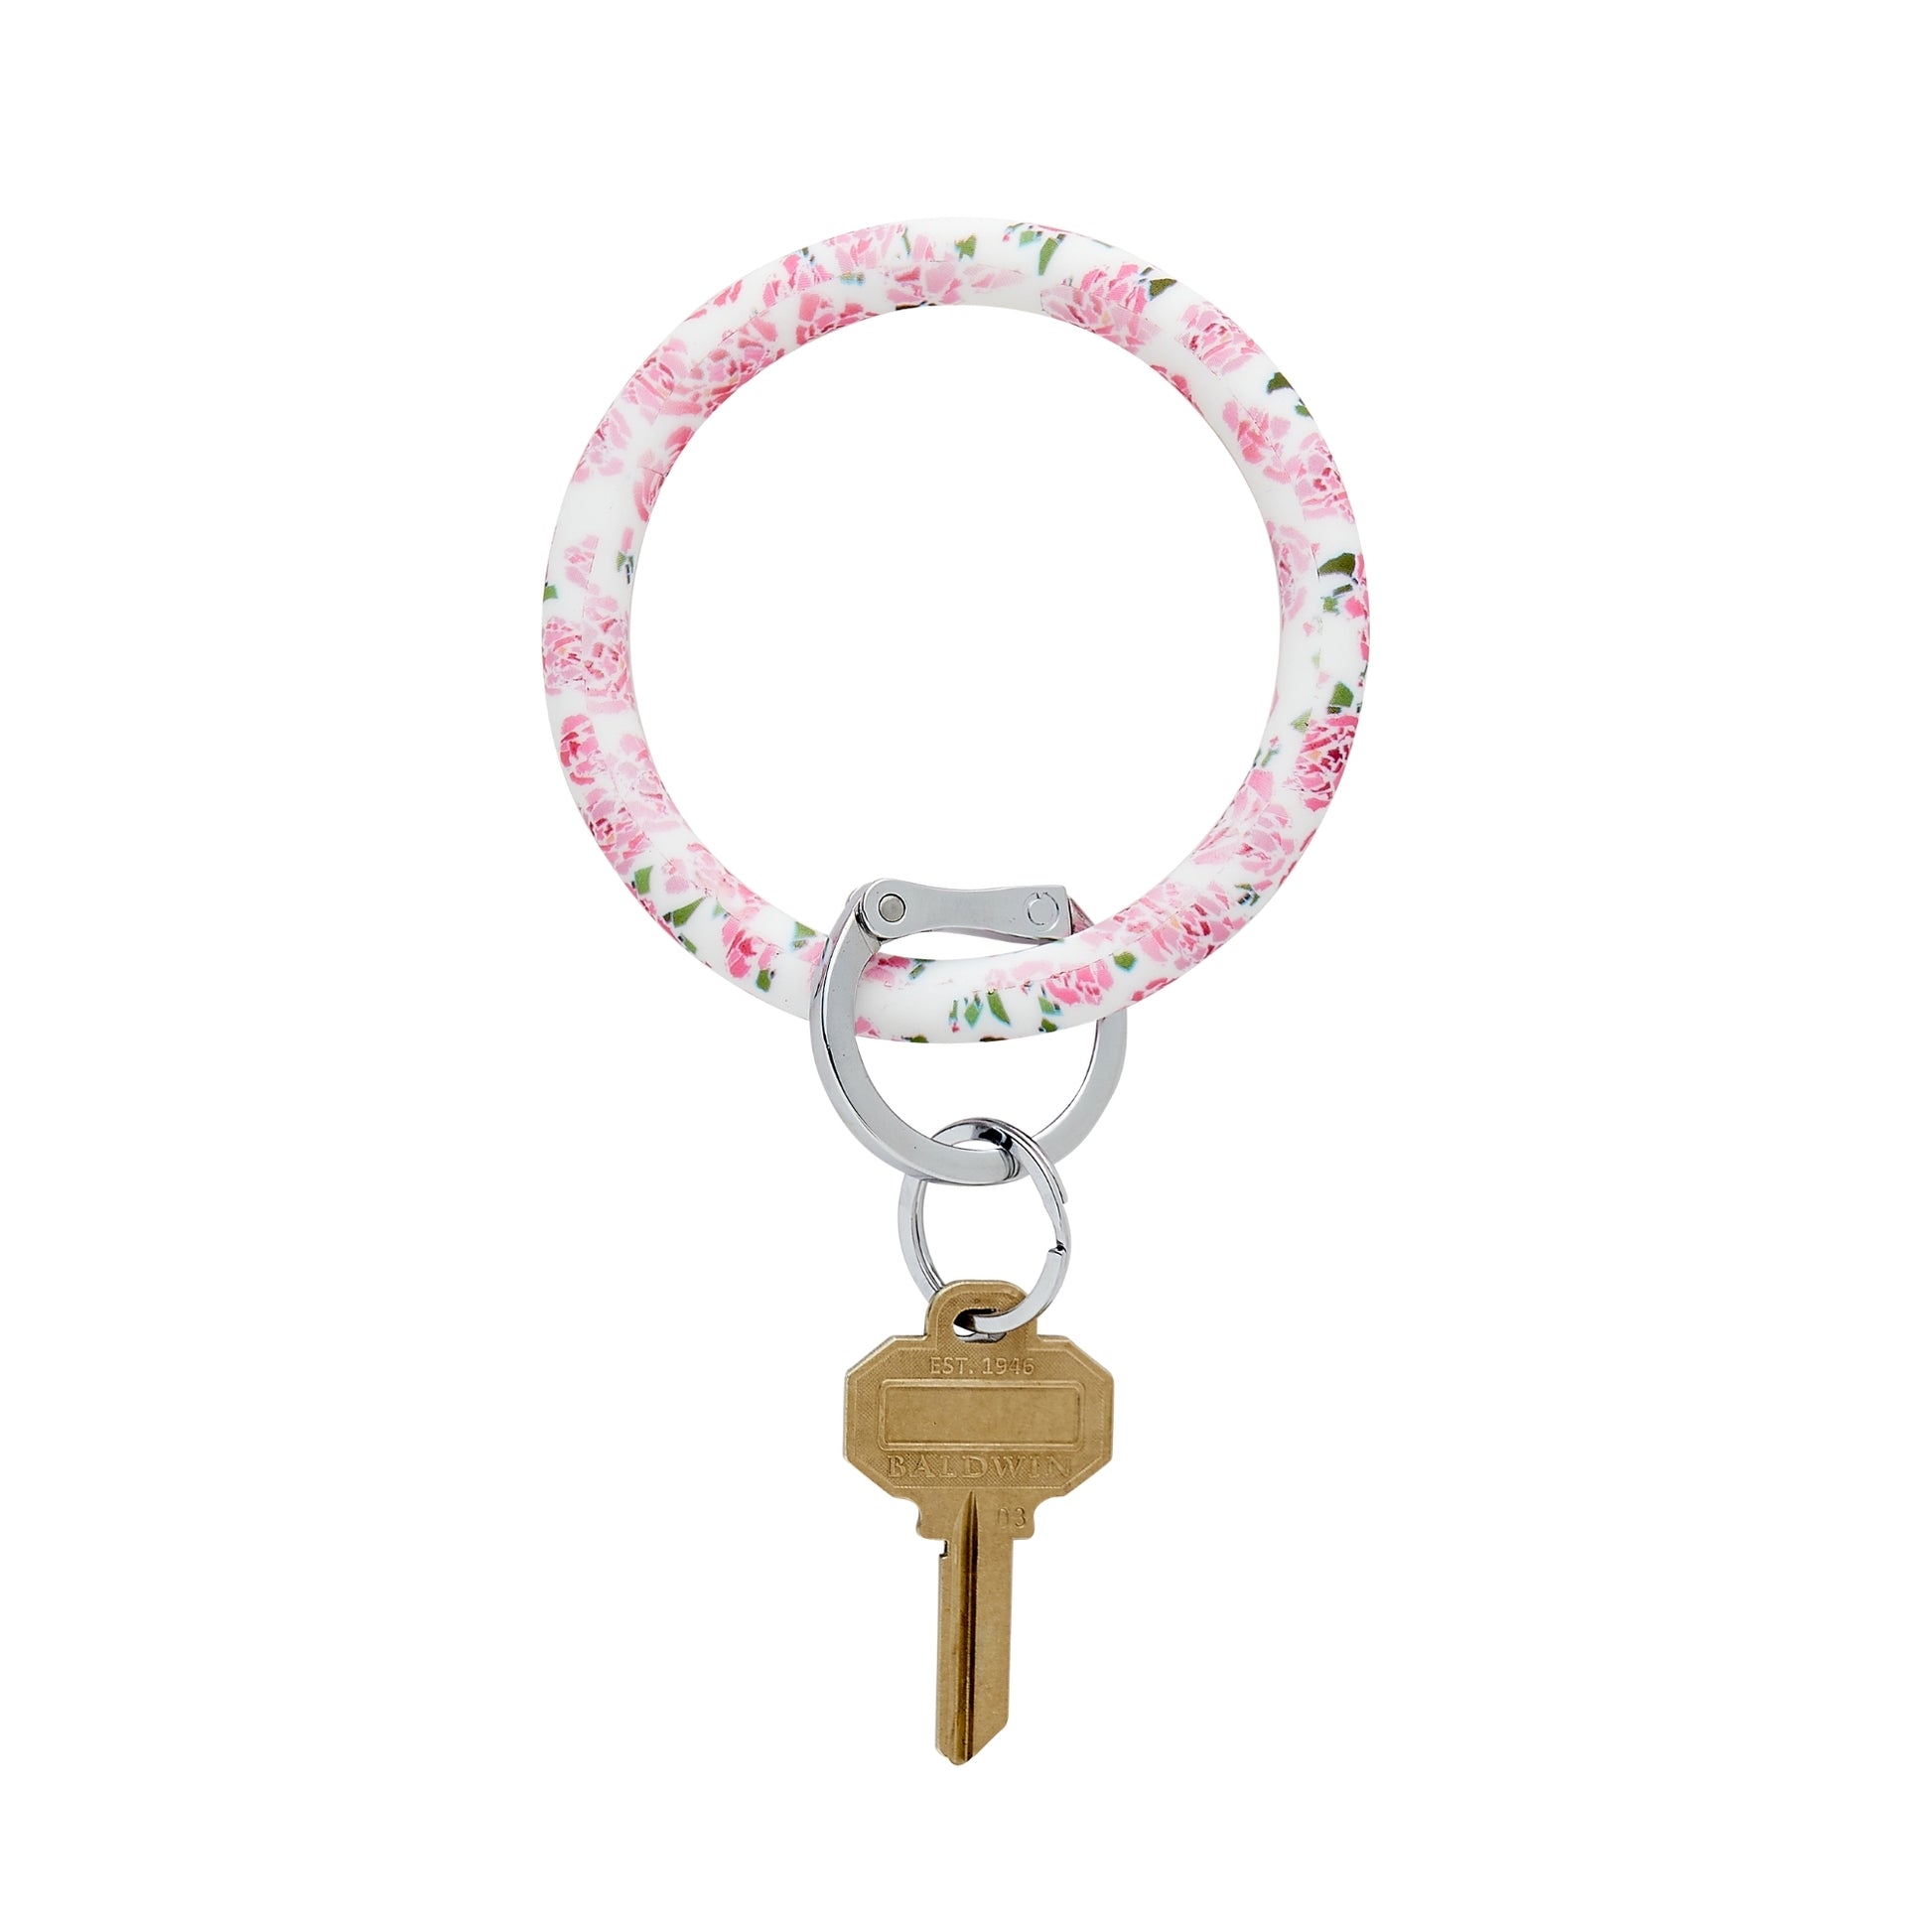 Another view of the other side of the big o key ring in a pink peony print.  This shows the back side where the peony print comes together.